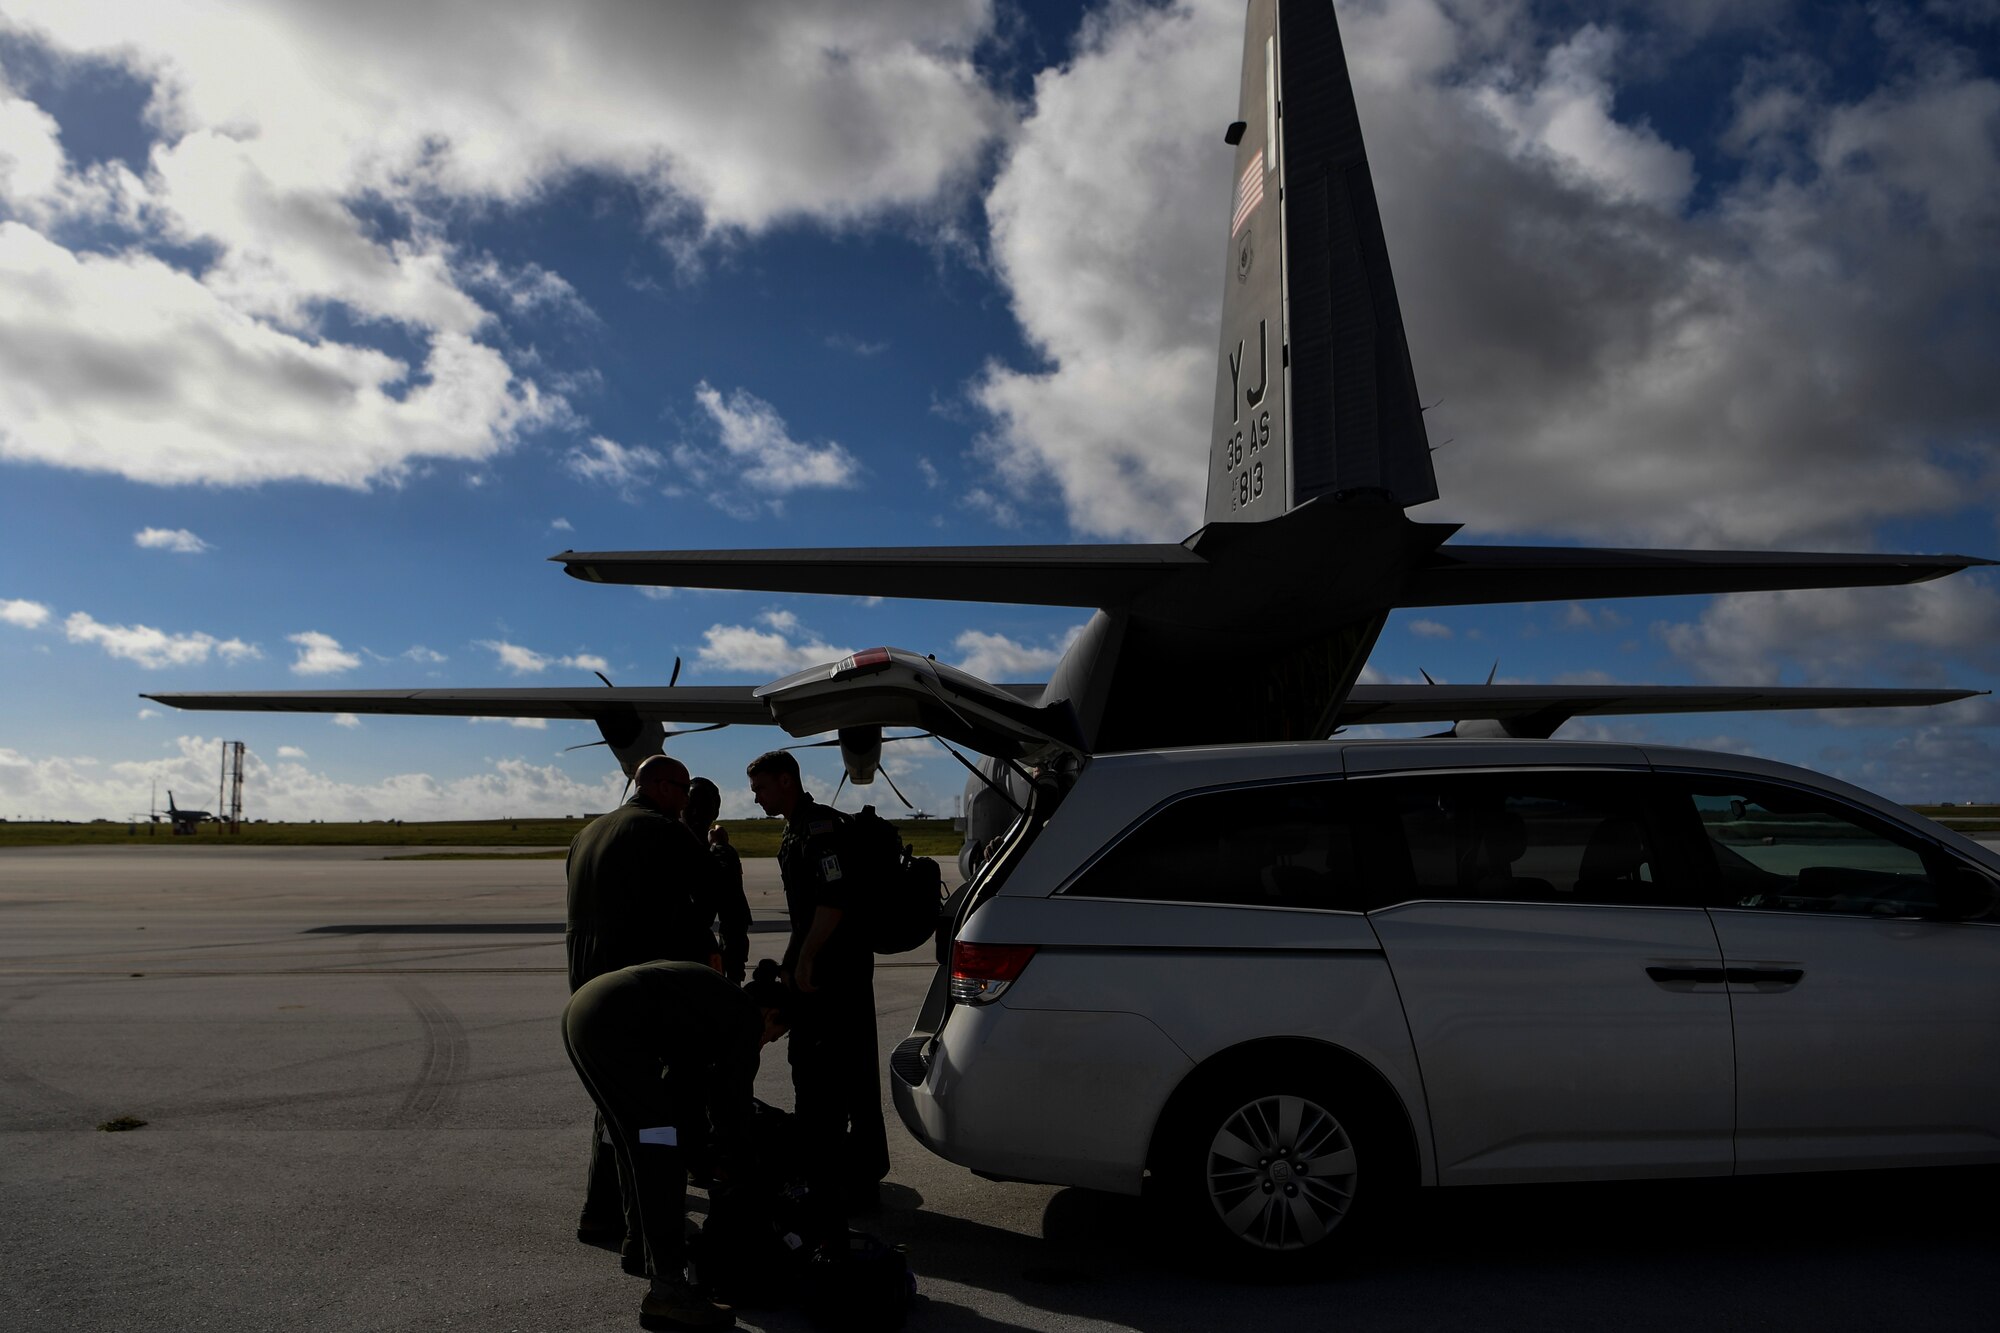 U.S. Air Force Reserve Airmen arrive for an aeromedical mission at the Andersen Air Force Base, Guam, flightline during exercise COPE NORTH 18 (CN18), Feb. 19.